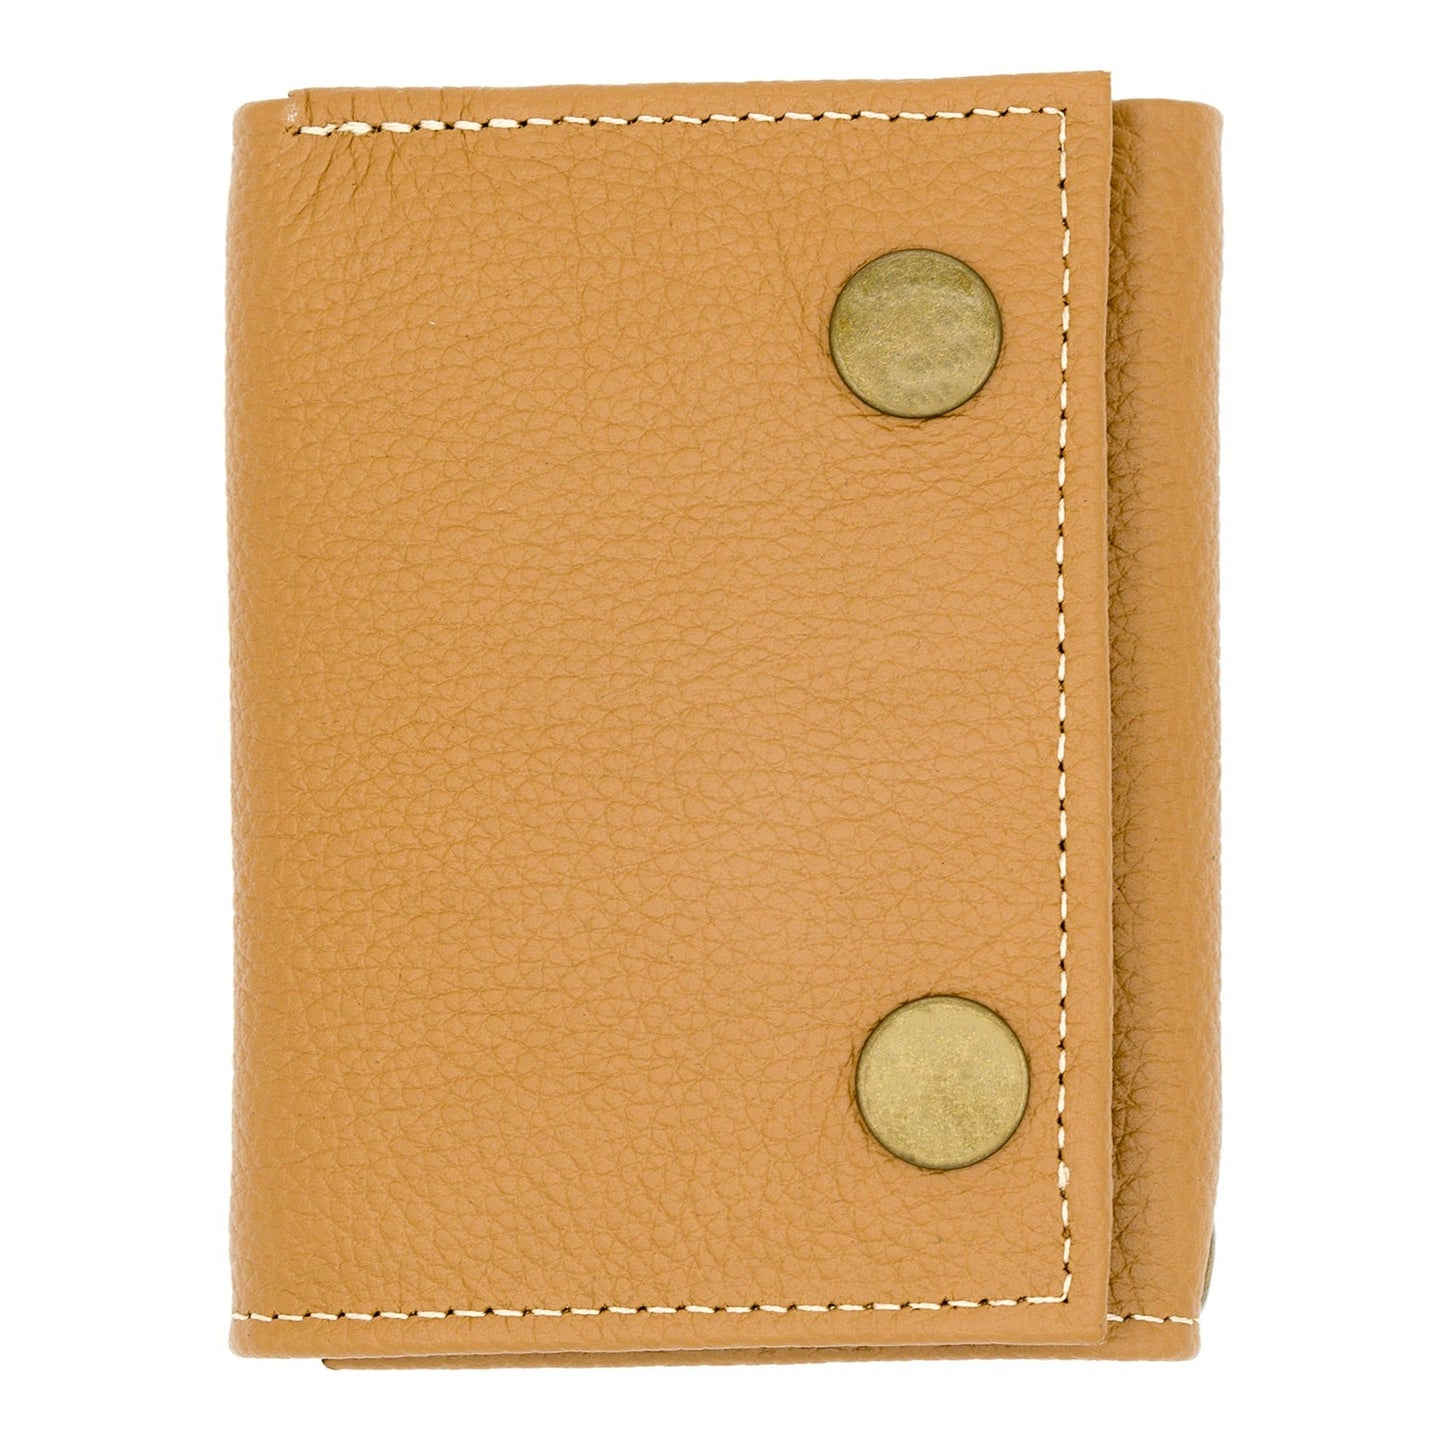 Snap Button Trifold Wallet for Biker